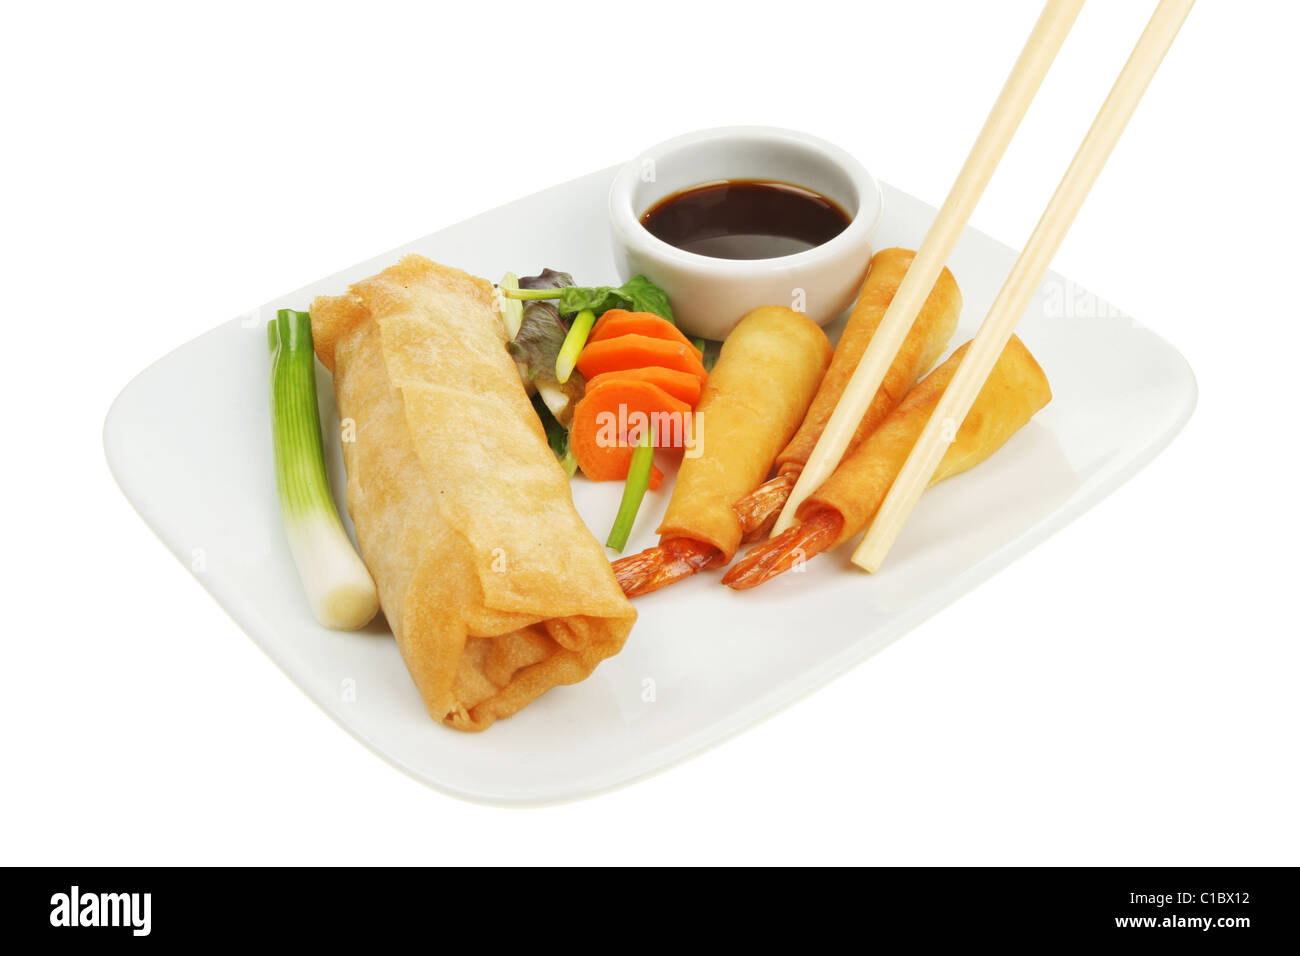 Chopsticks picking a wrapped prawn from a plate of Chinese food Stock Photo